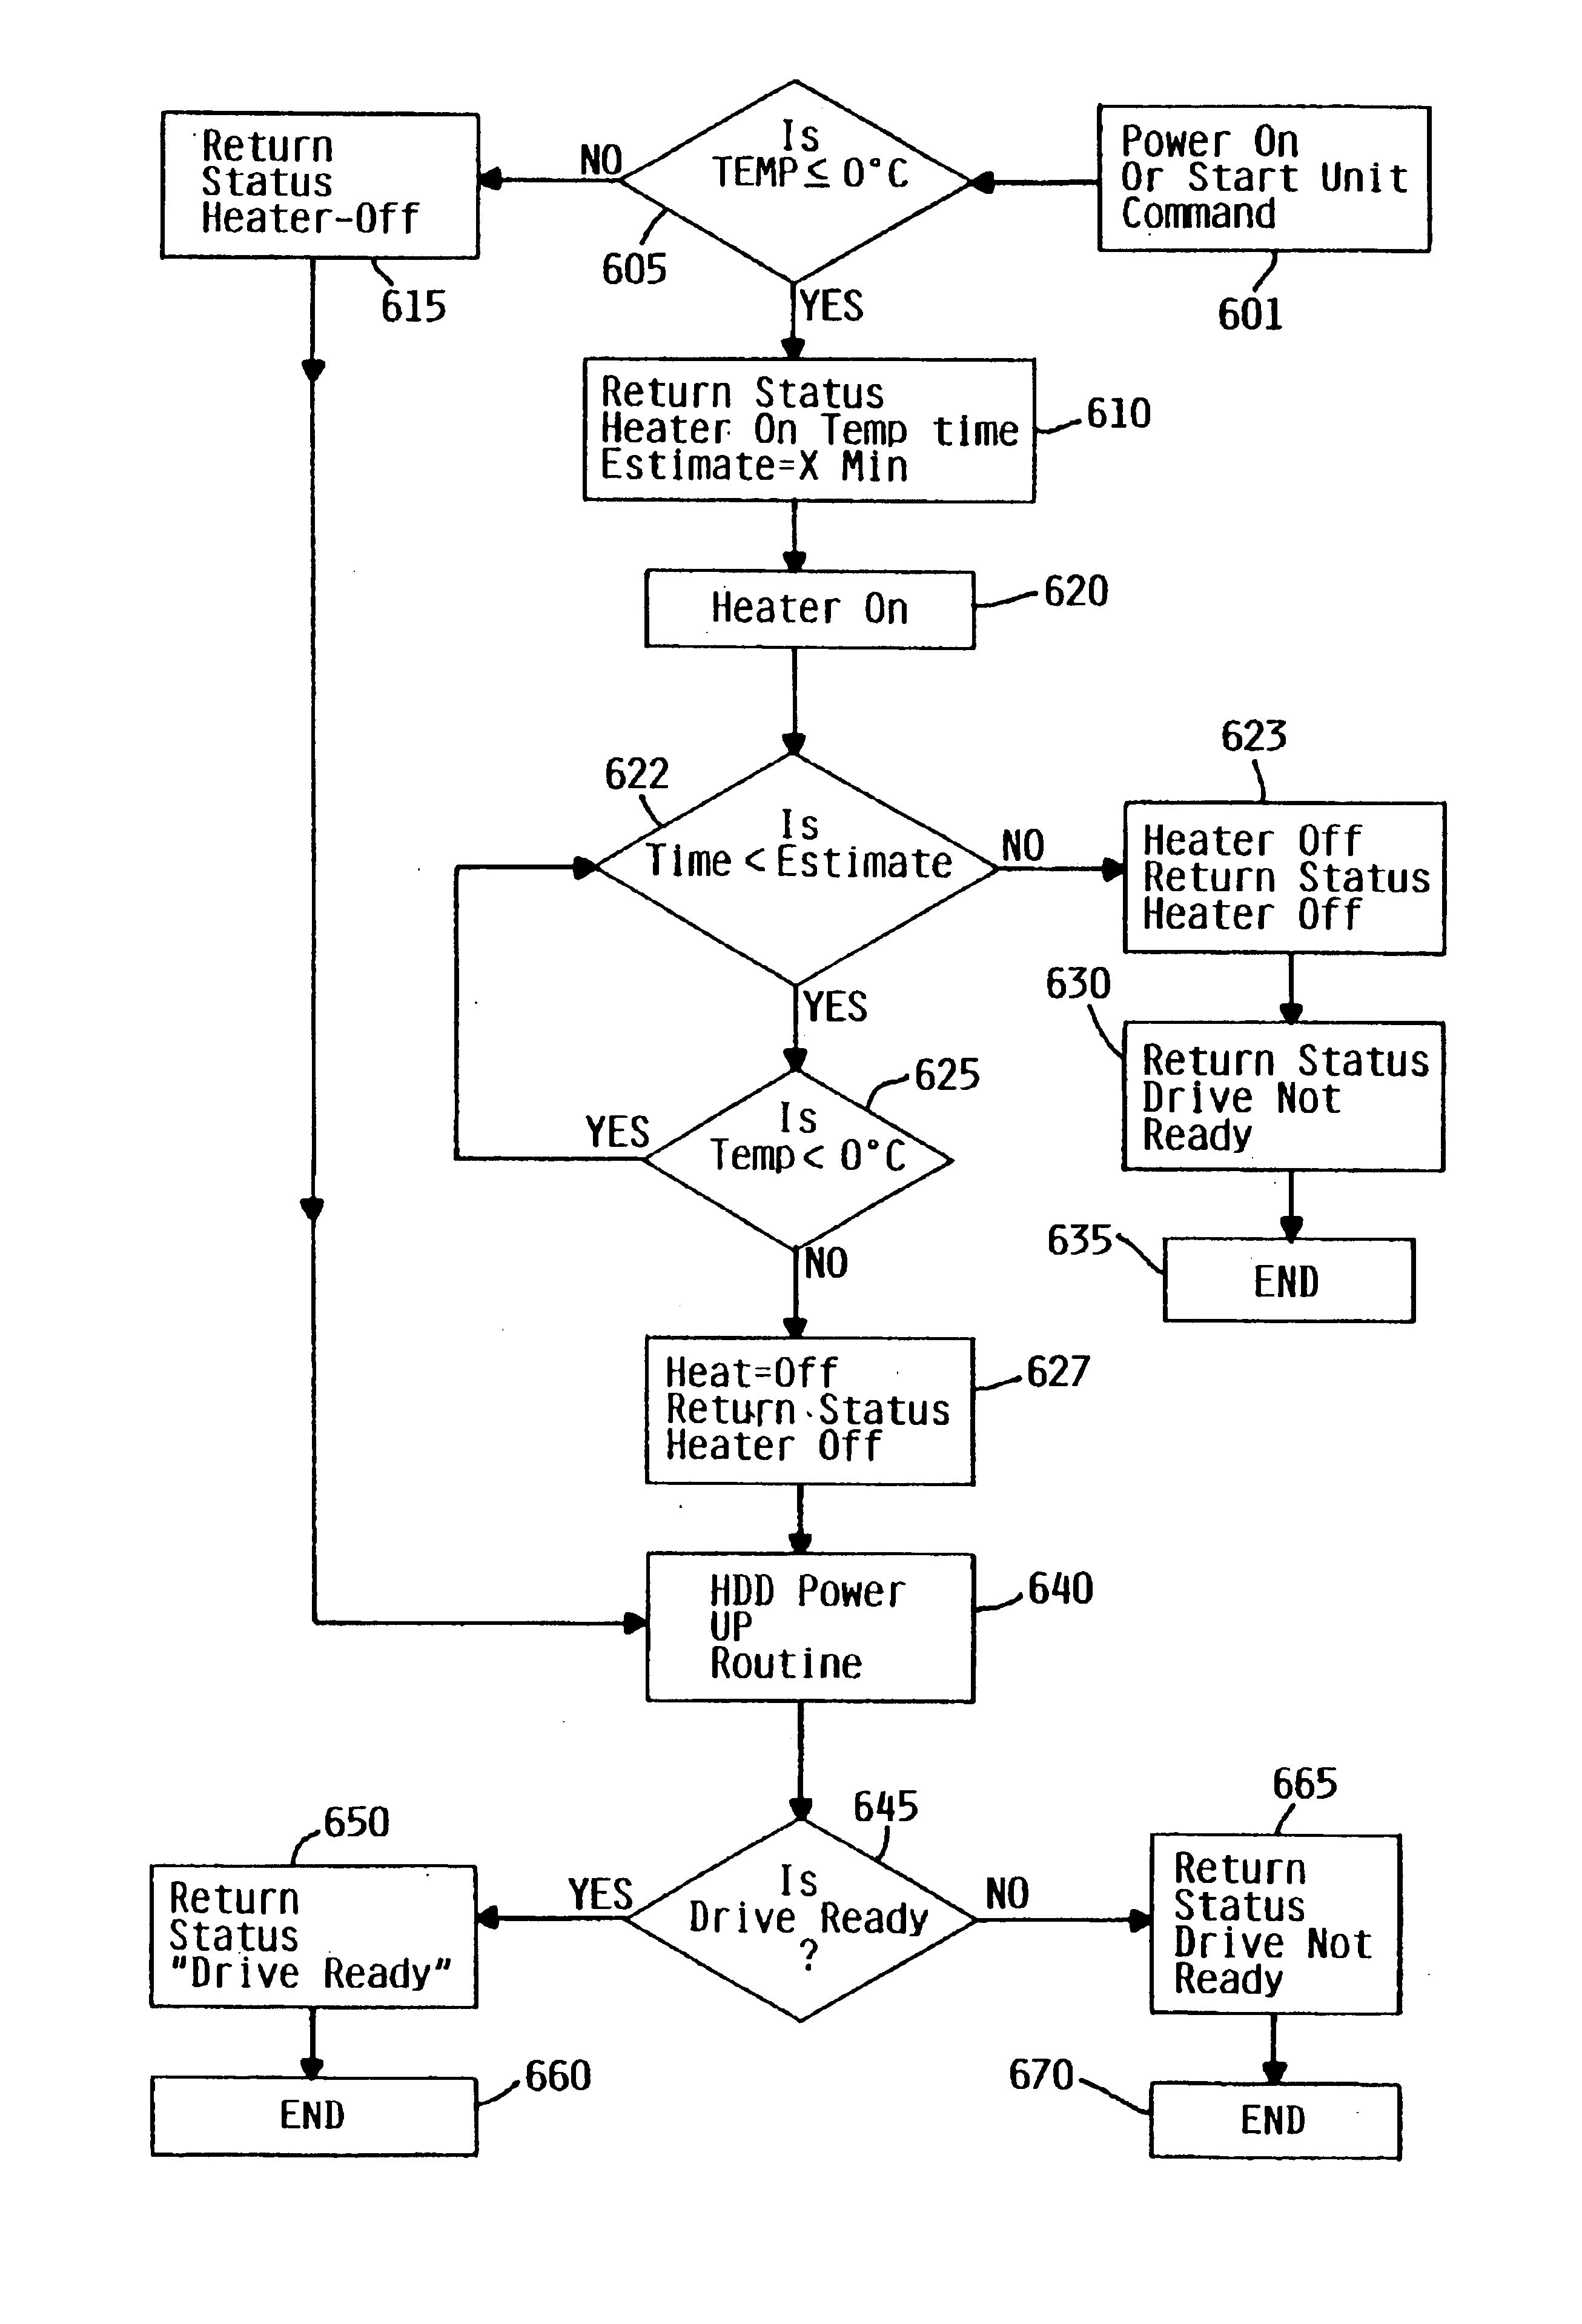 Method and apparatus for enabling cold temperature performance of a disk